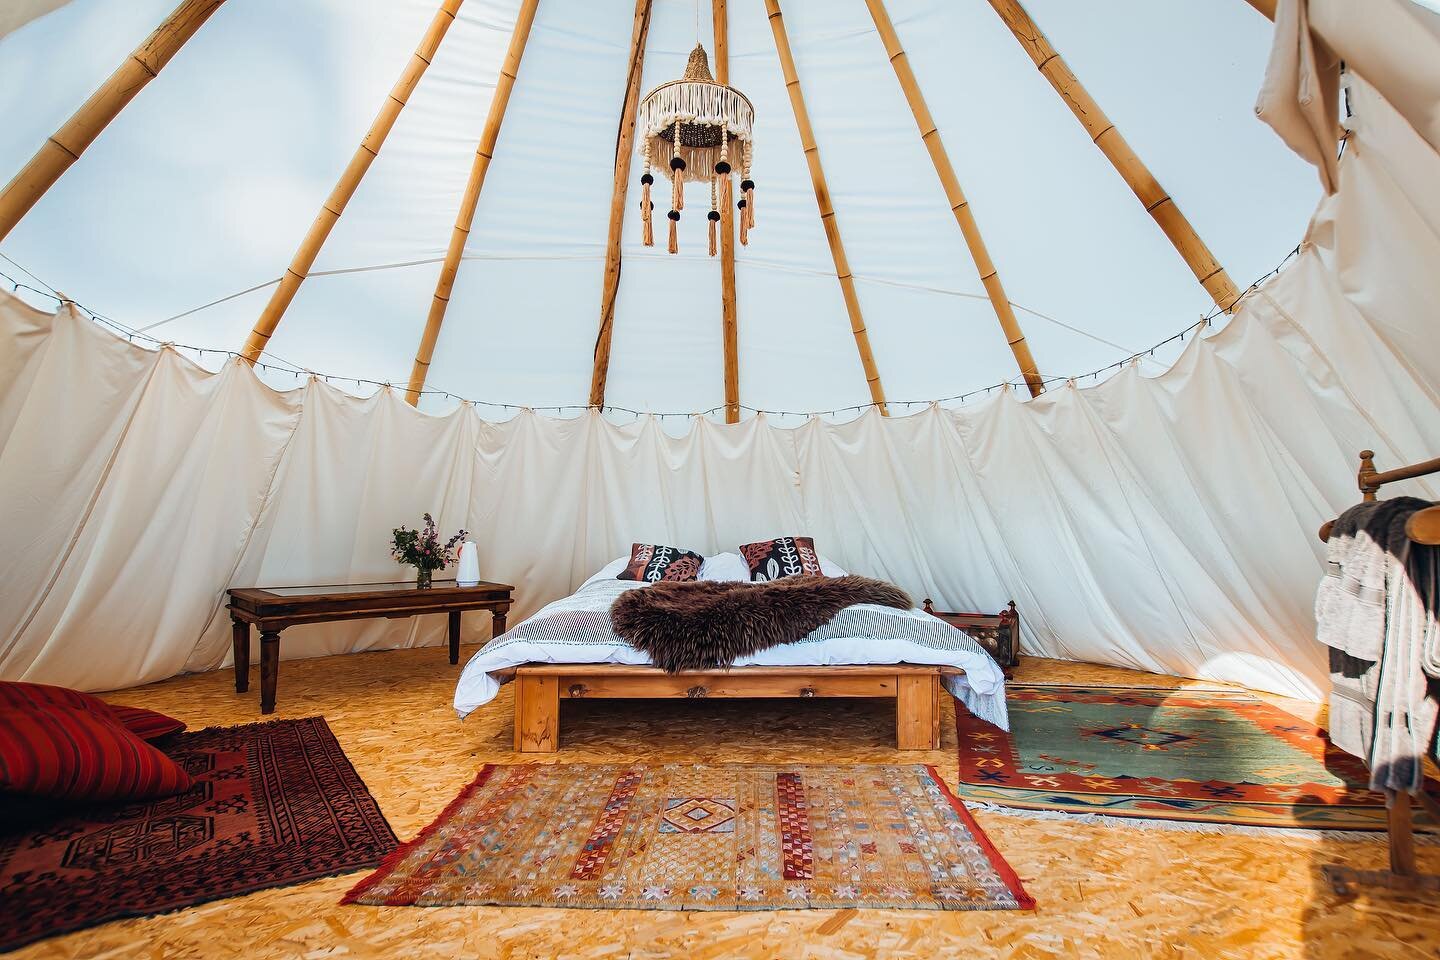 L O O K ~ S E E

s p a c i o u s &bull; b o h e m i a n 

Looking at a Tipi from the outside belies what&rsquo;s to be found on the inside &hellip;that&rsquo;s what never ceases to create that elusive &lsquo;wow factor&rsquo;.
I swear it makes my hea